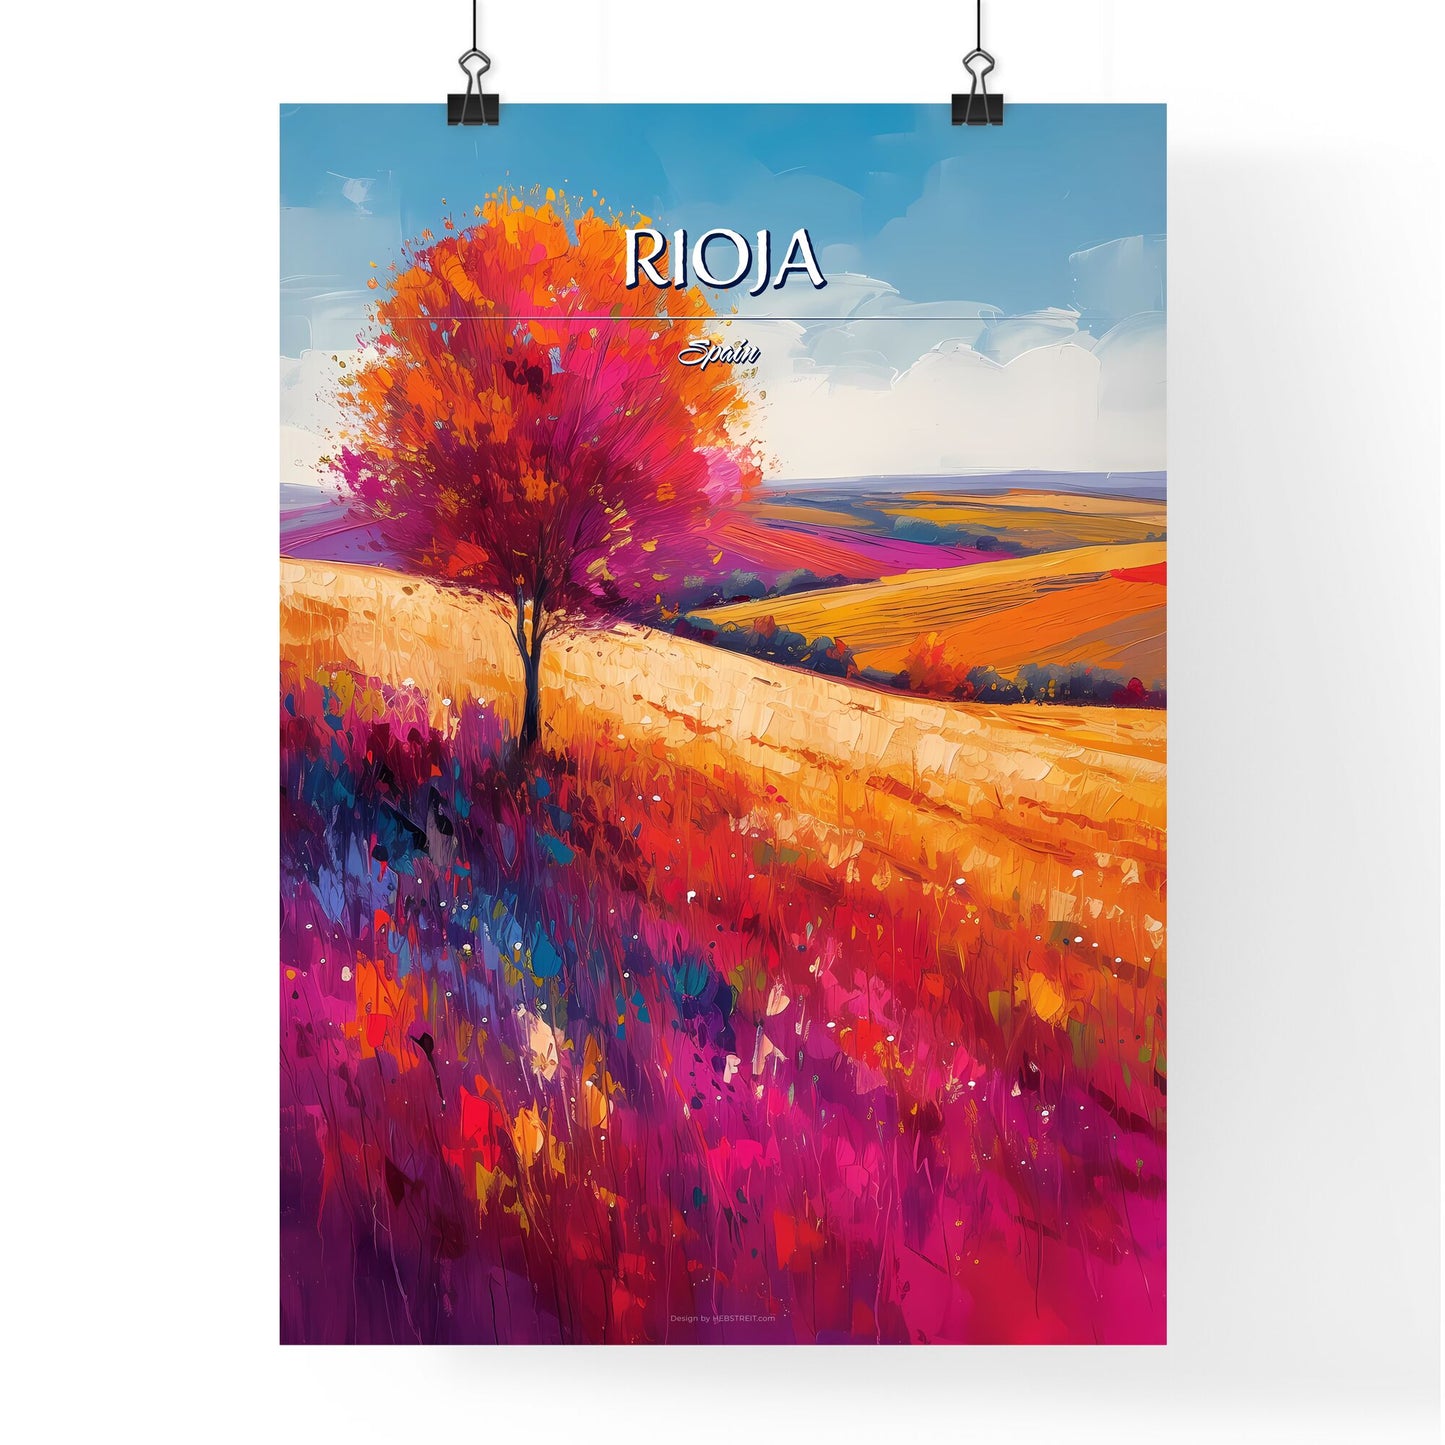 Rioja, Spain - Art print of a painting of a tree in a field of flowers Default Title